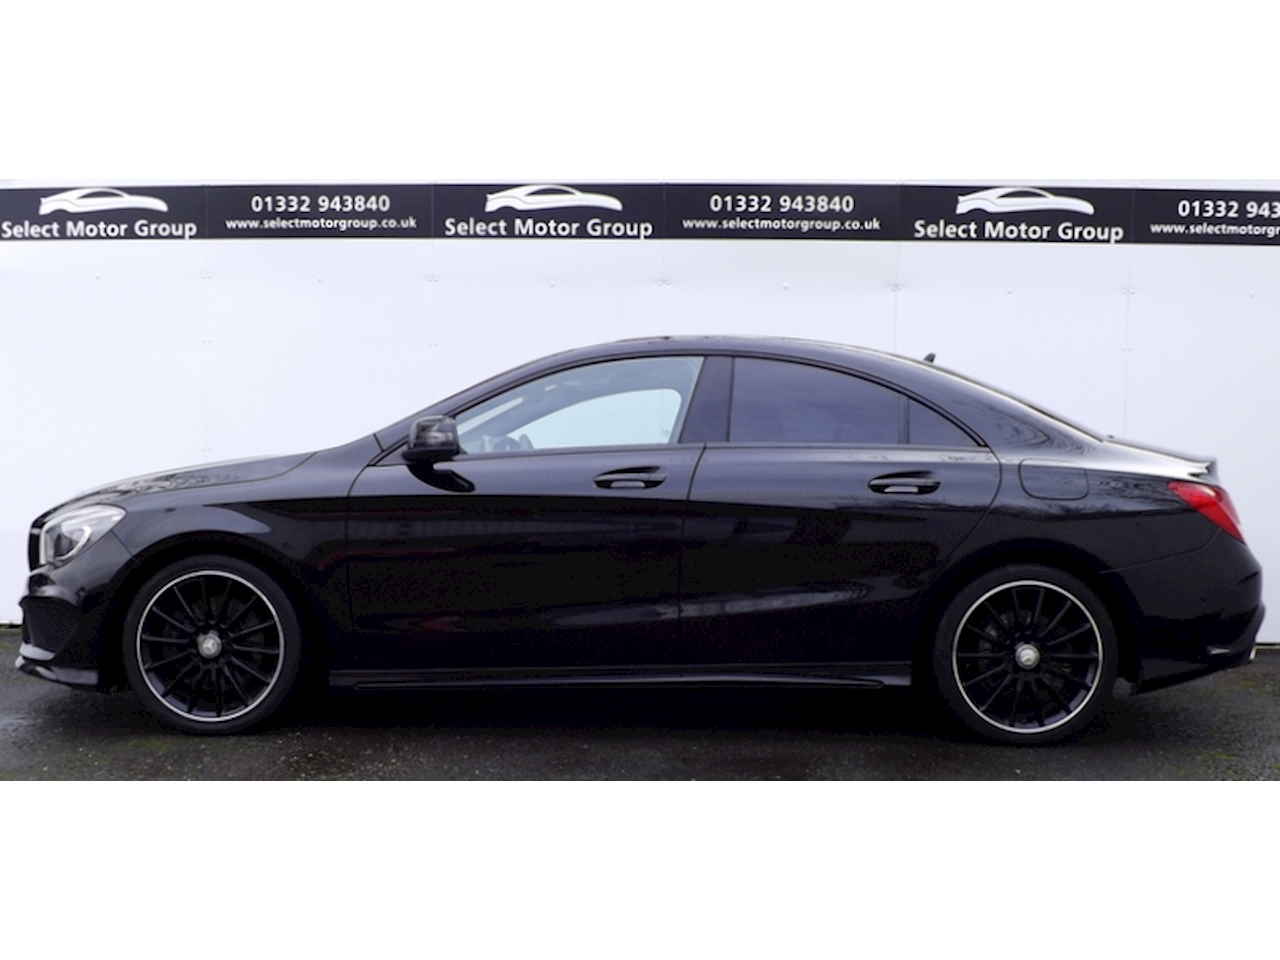 CLA CLA 220 D 2.2 CDI 4Matic AMG Line 4dr Saloon Automatic Diesel